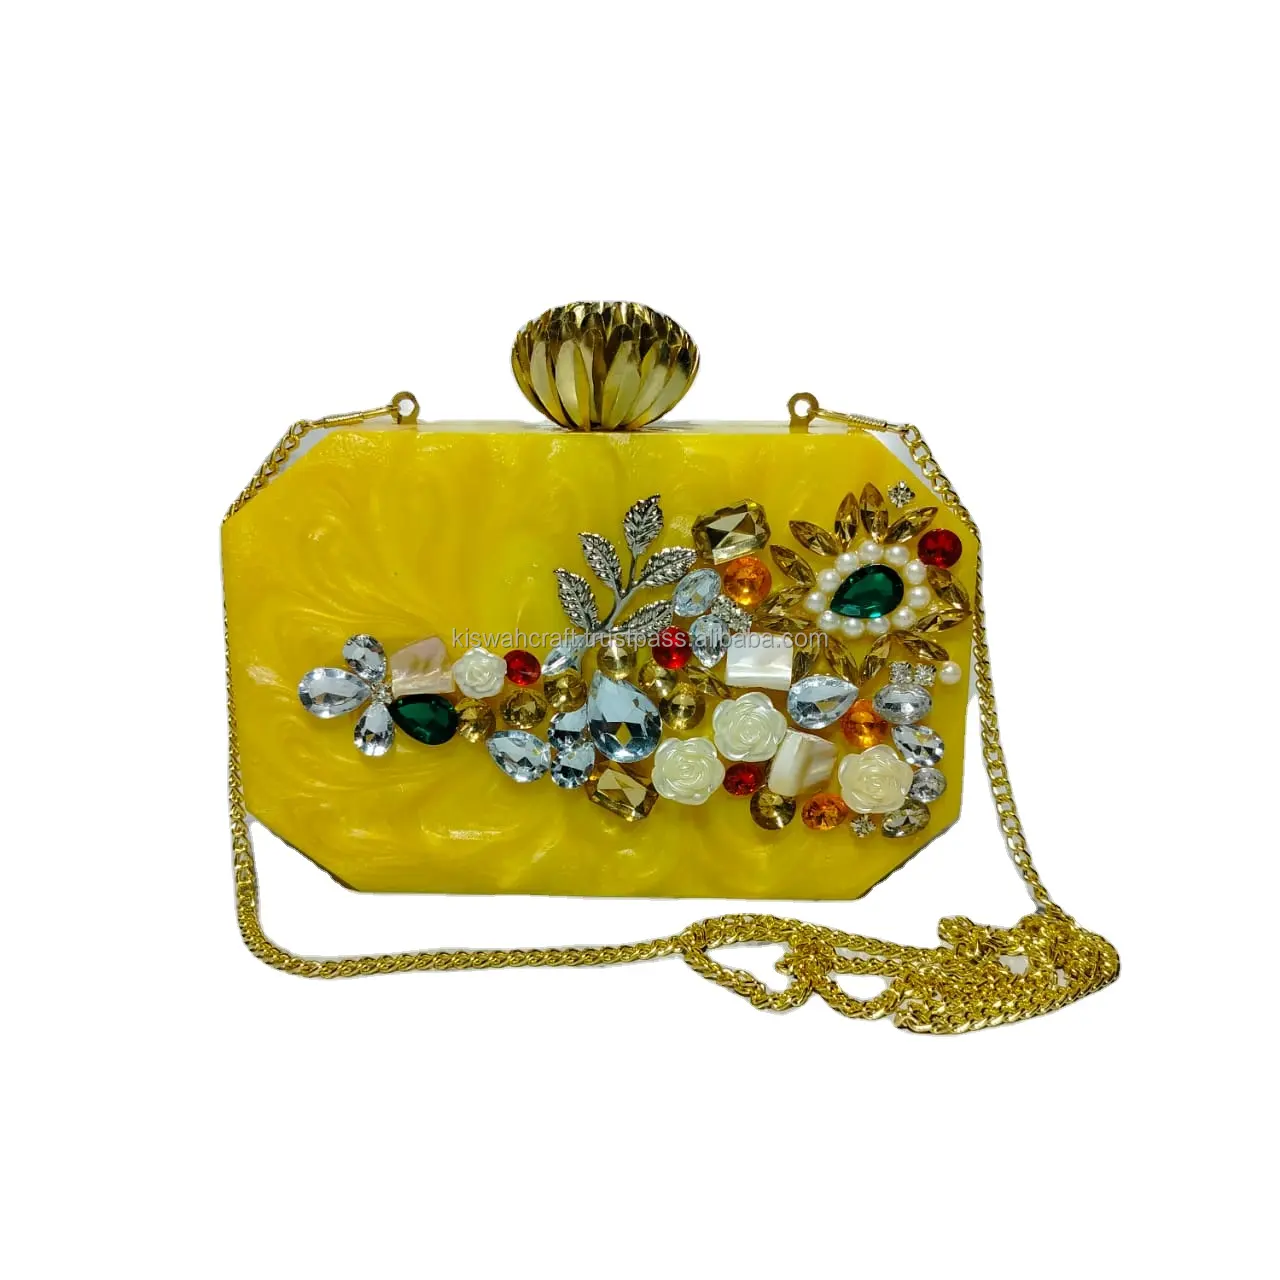 Trendy Yellow Resin agates Clutch Bags On Very Low Price From India Manufactured